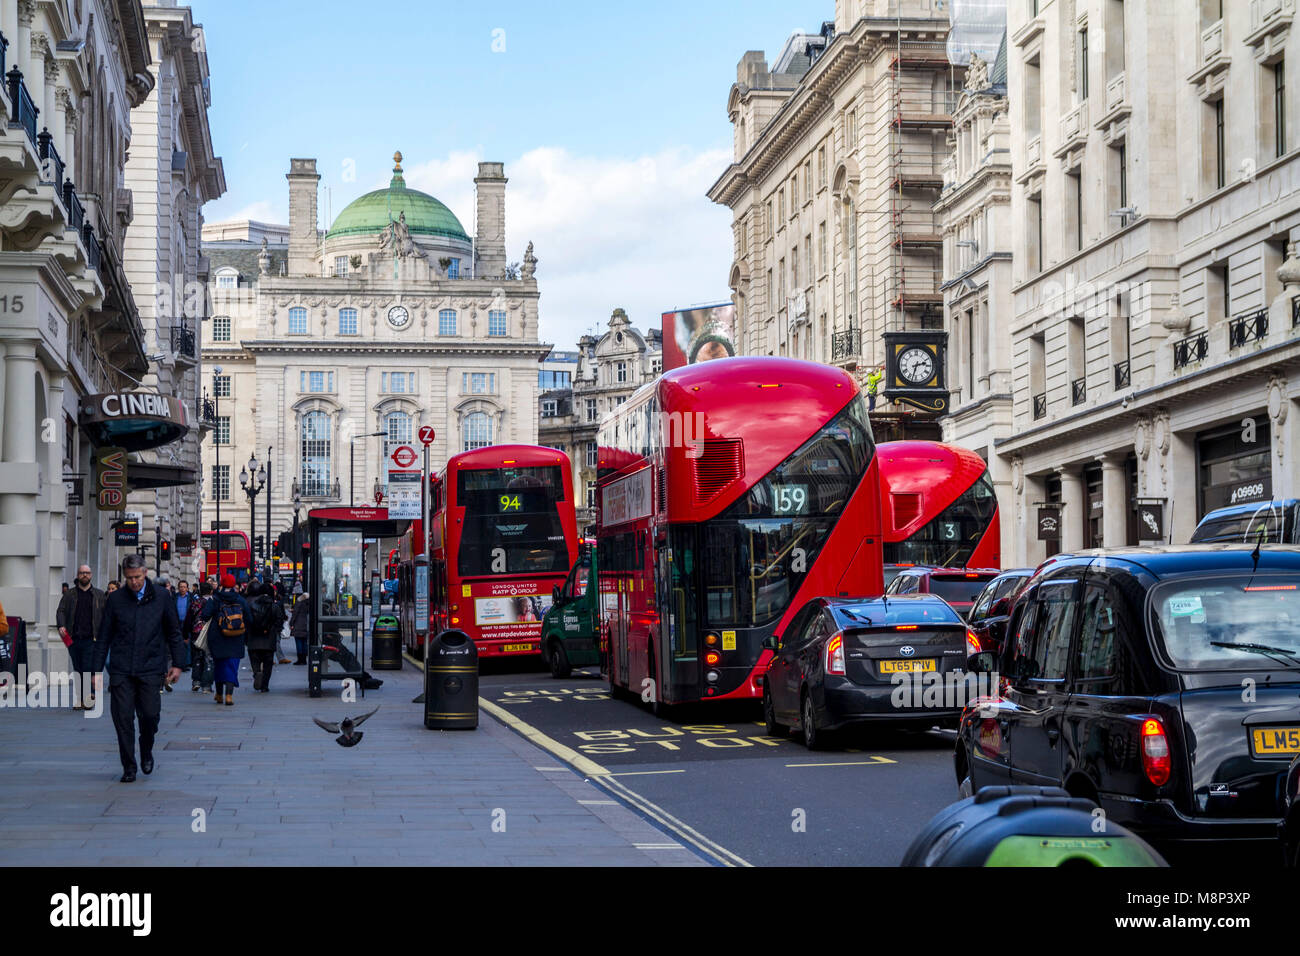 London traffic, red buses, black taxis, lower regent st, United kingdom london shoppers Stock Photo